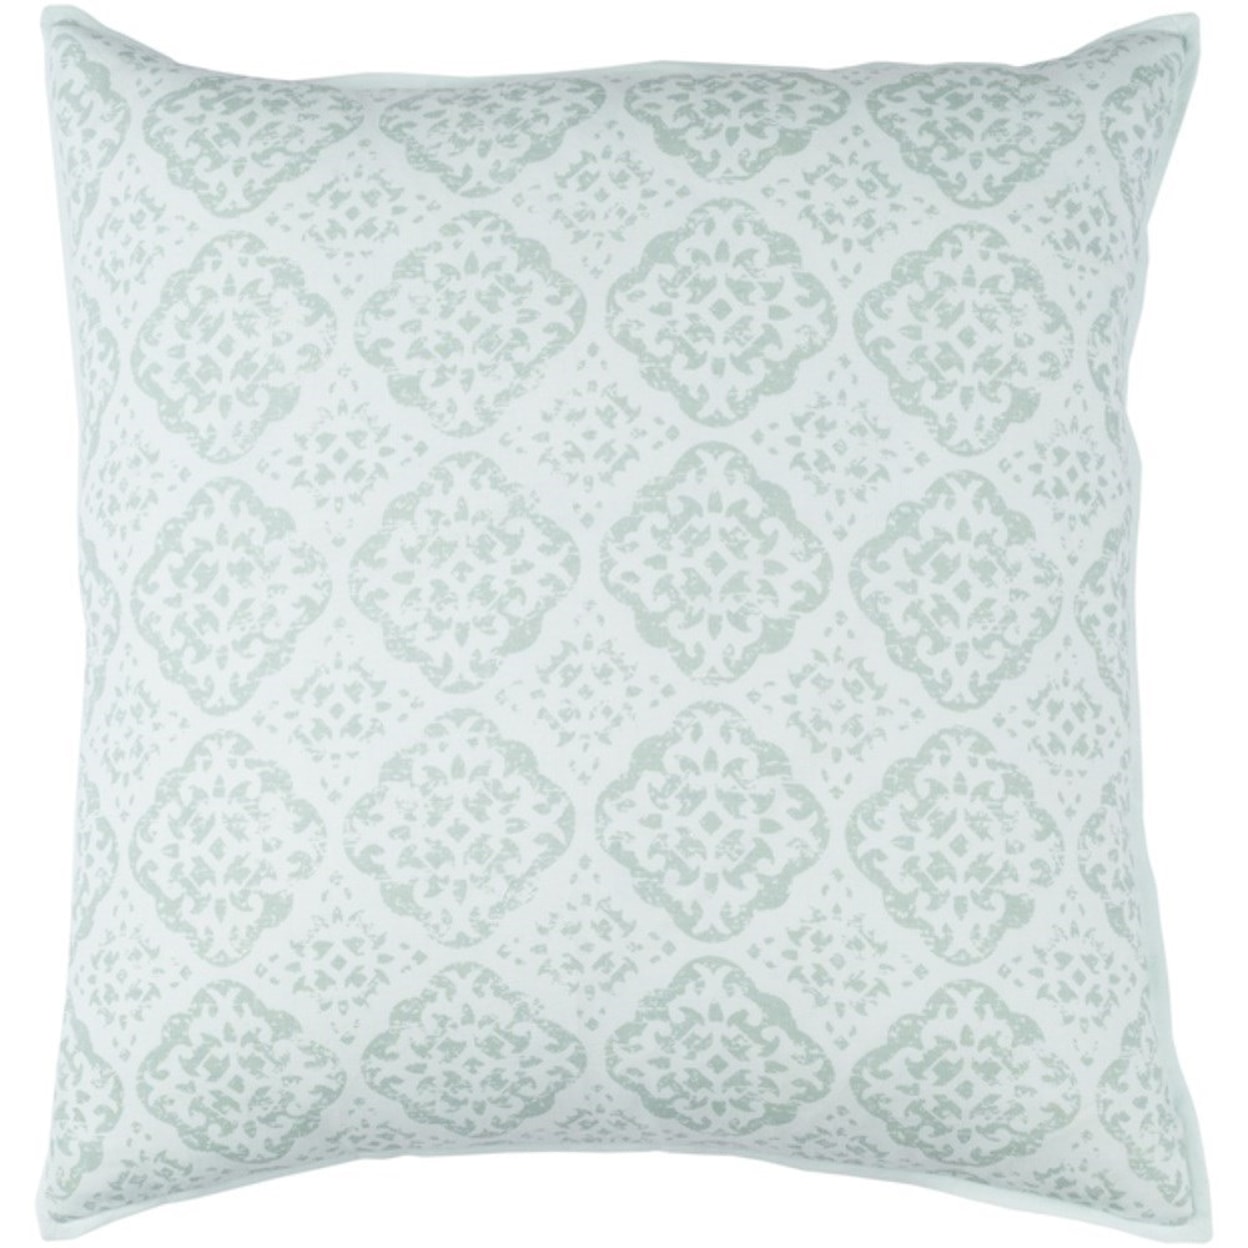 Ruby-Gordon Accents D'orsay Pillow